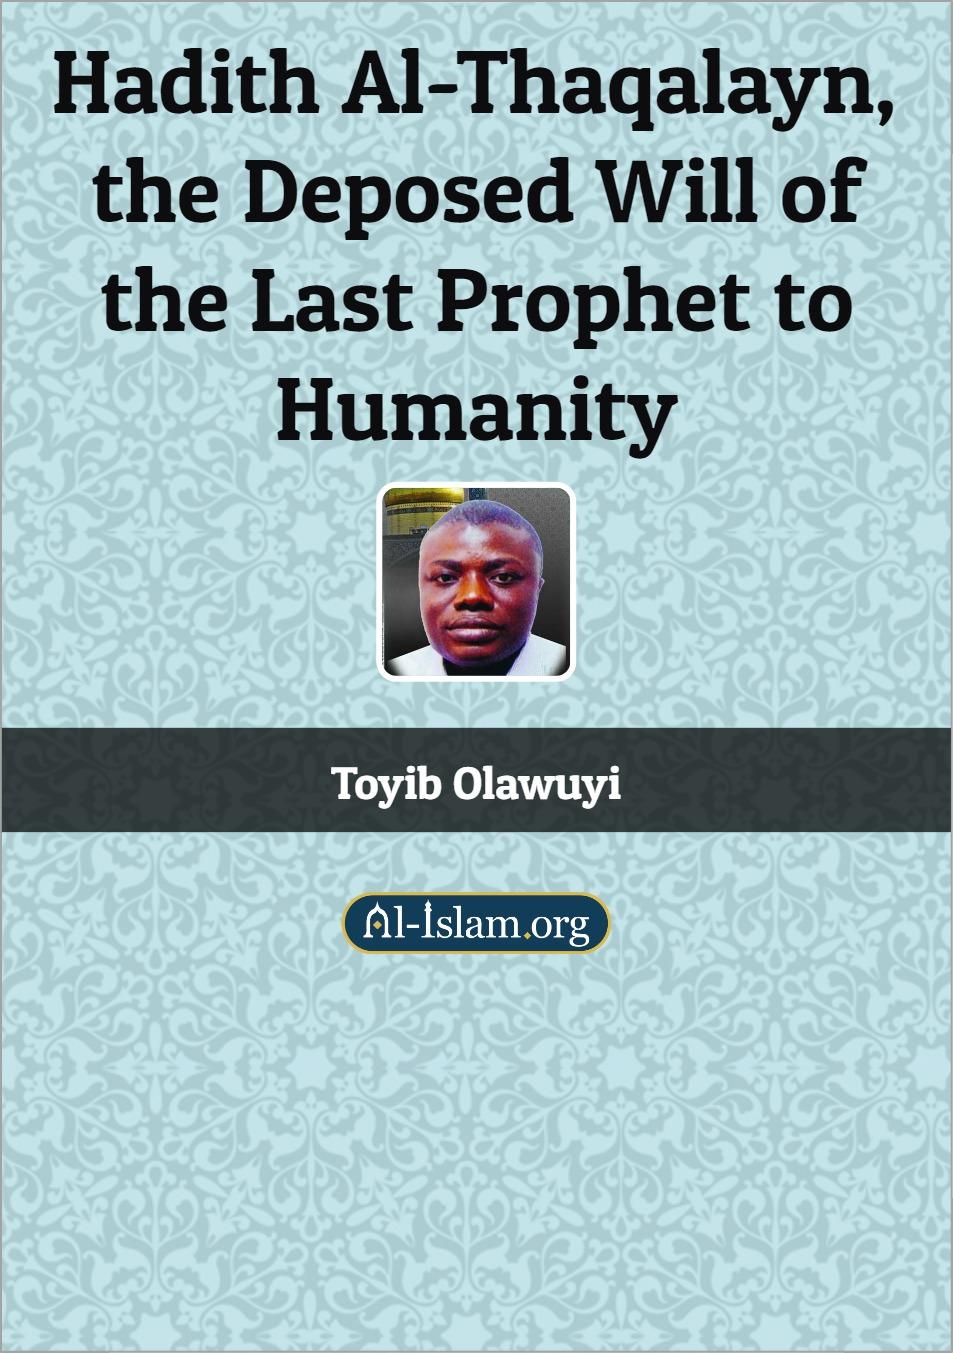 Hadith Al Thaqalayn, the Deposed Will of the Last Prophet to Humanity